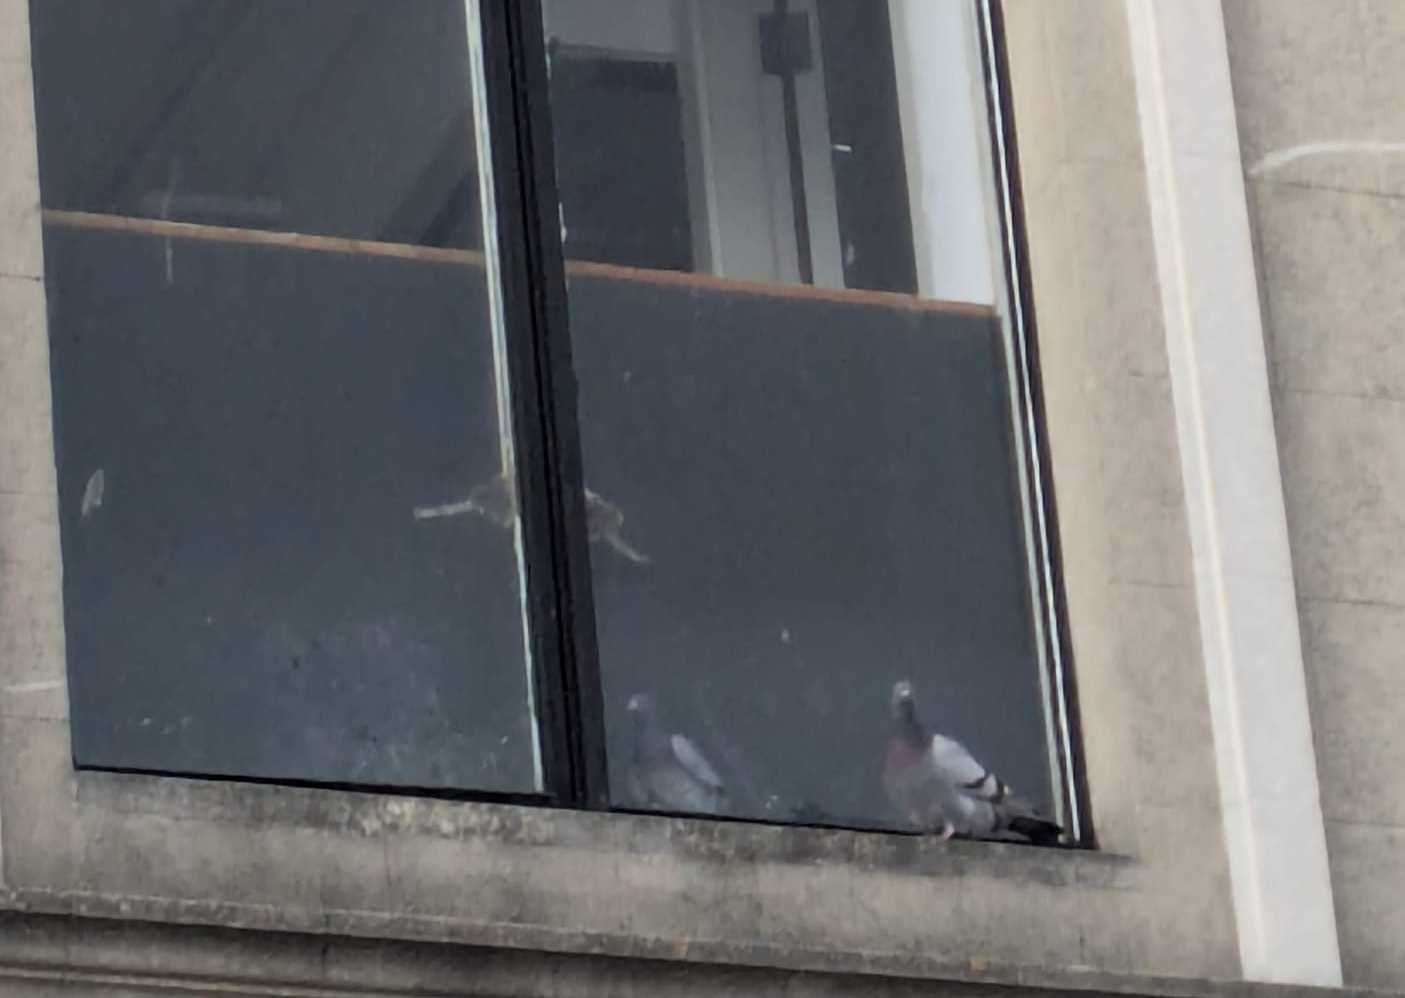 The trapped pigeon had its mate waiting for it on the other side of the glass